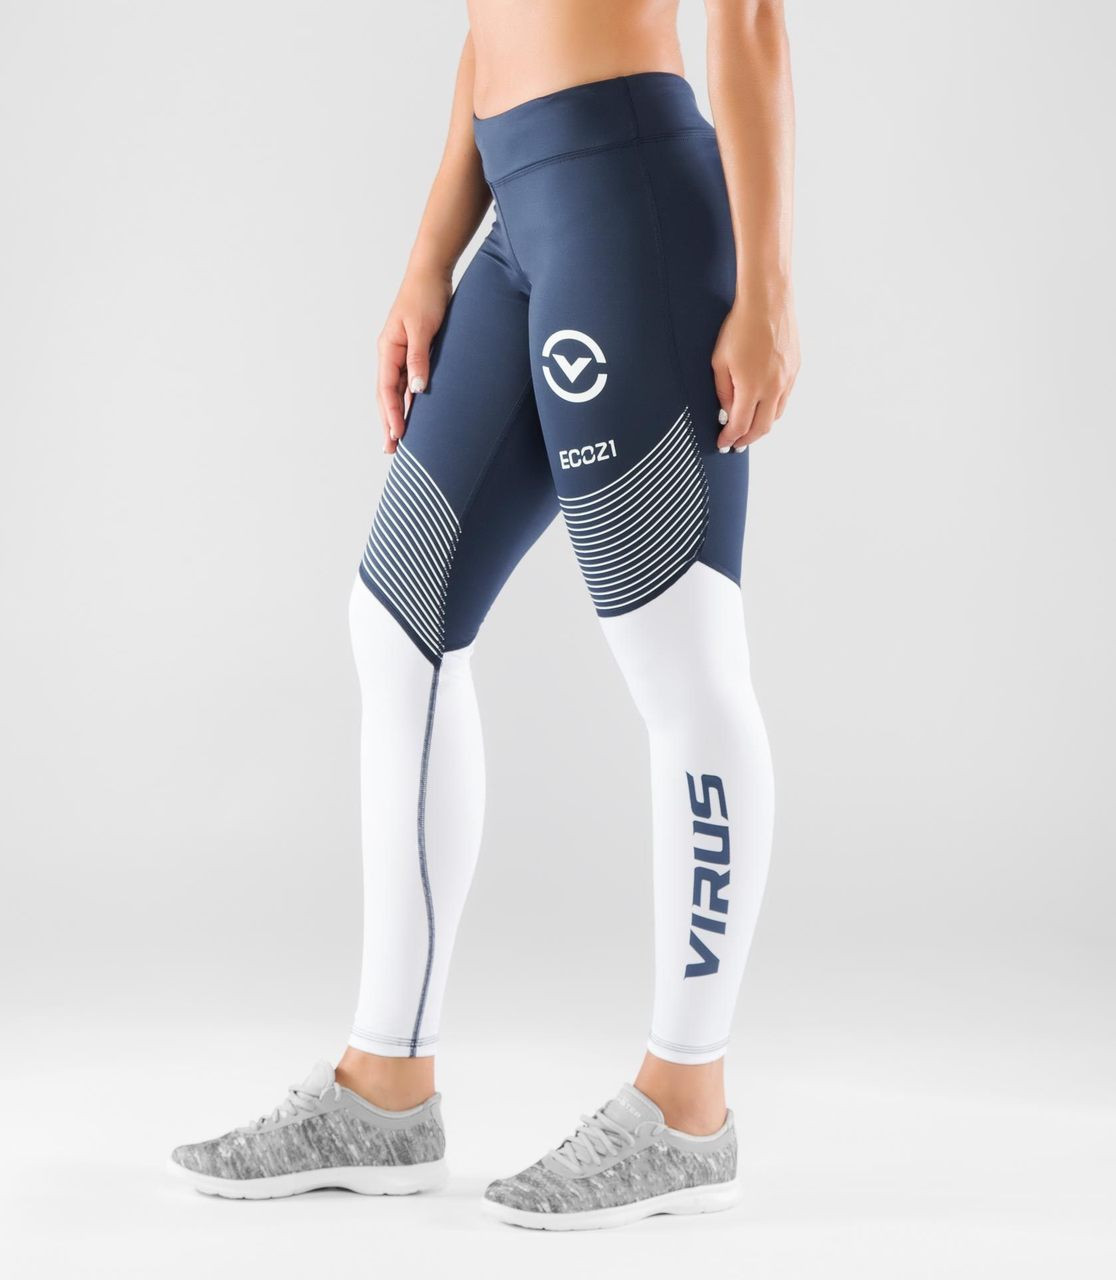 VIRUS, ECO21.5, STAY COOL V2 COMPRESSION PANT